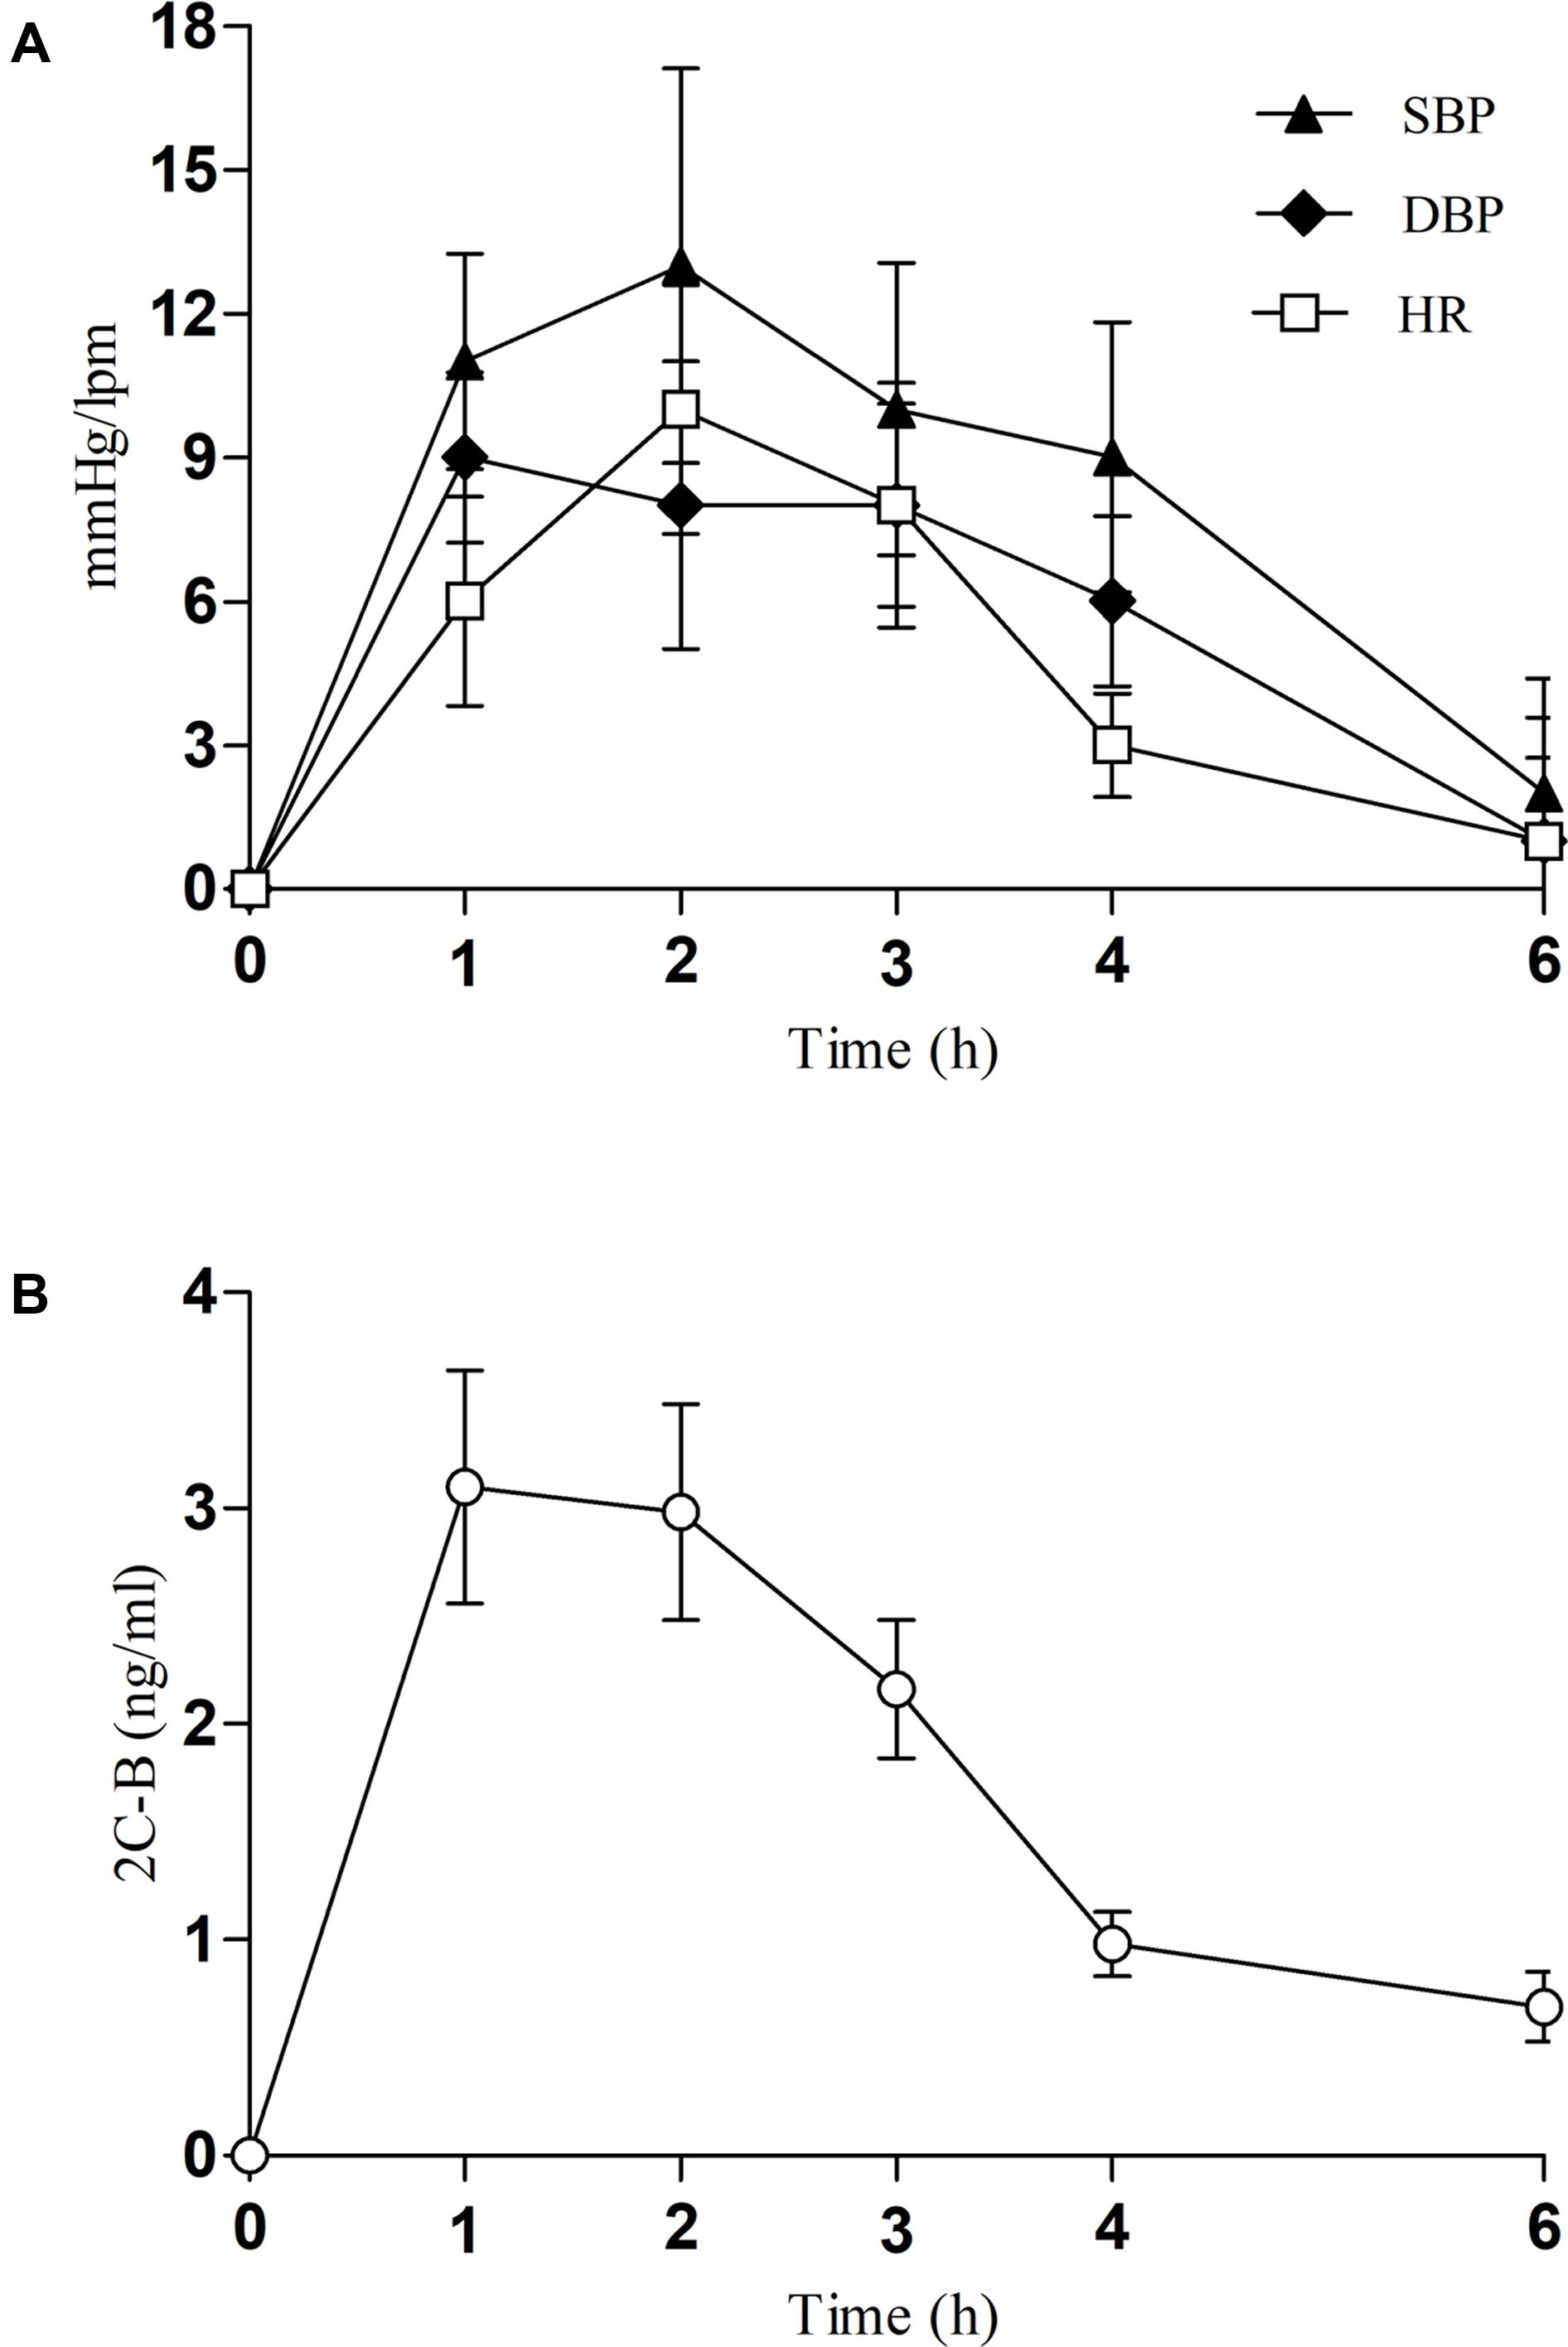 Frontiers Acute Pharmacological Effects Of 2c B In Humans An Observational Study Pharmacology